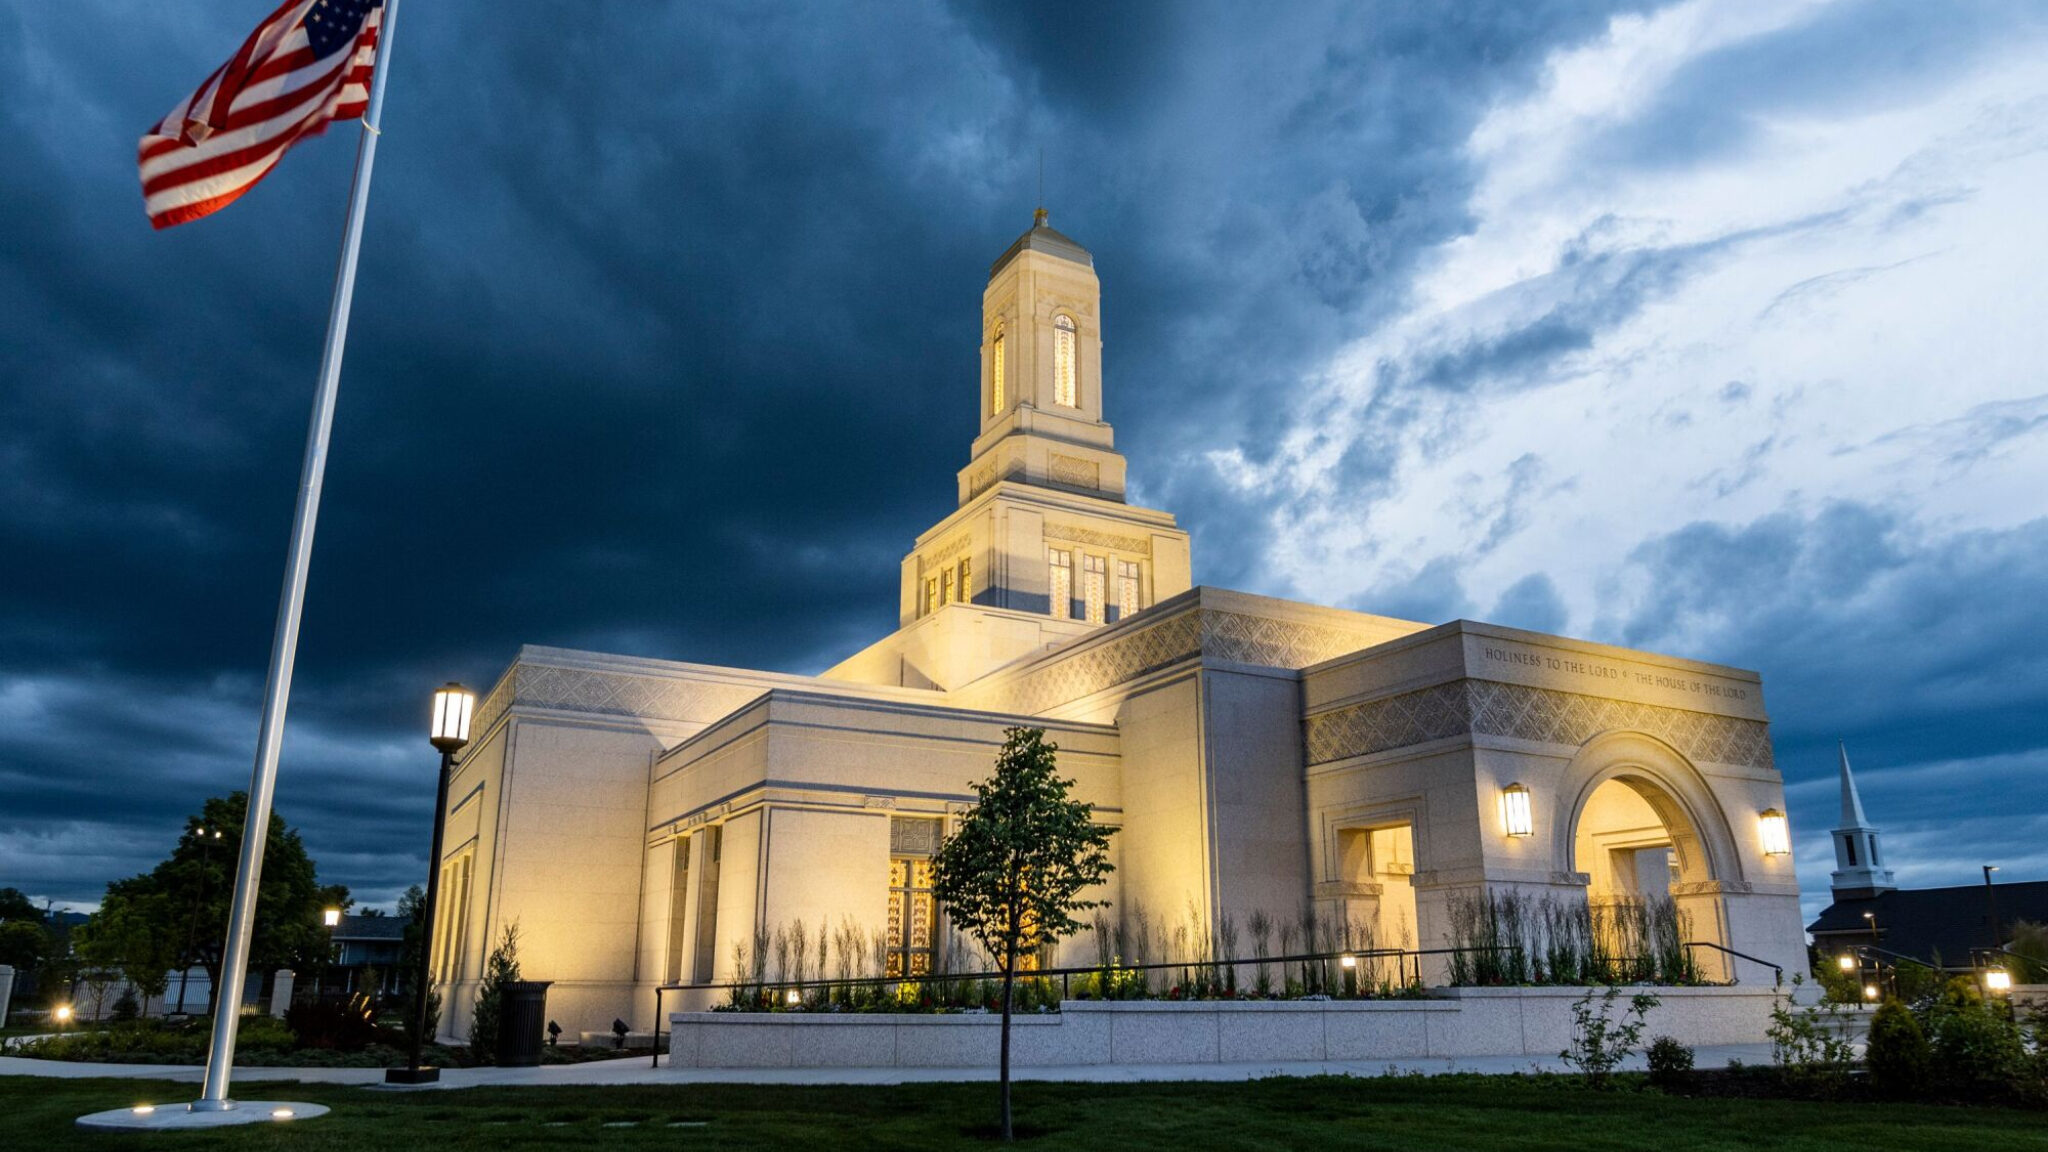 The Helena Montana Temple of The Church of Jesus Christ of Latter-day Saints was dedicated on Sunda...